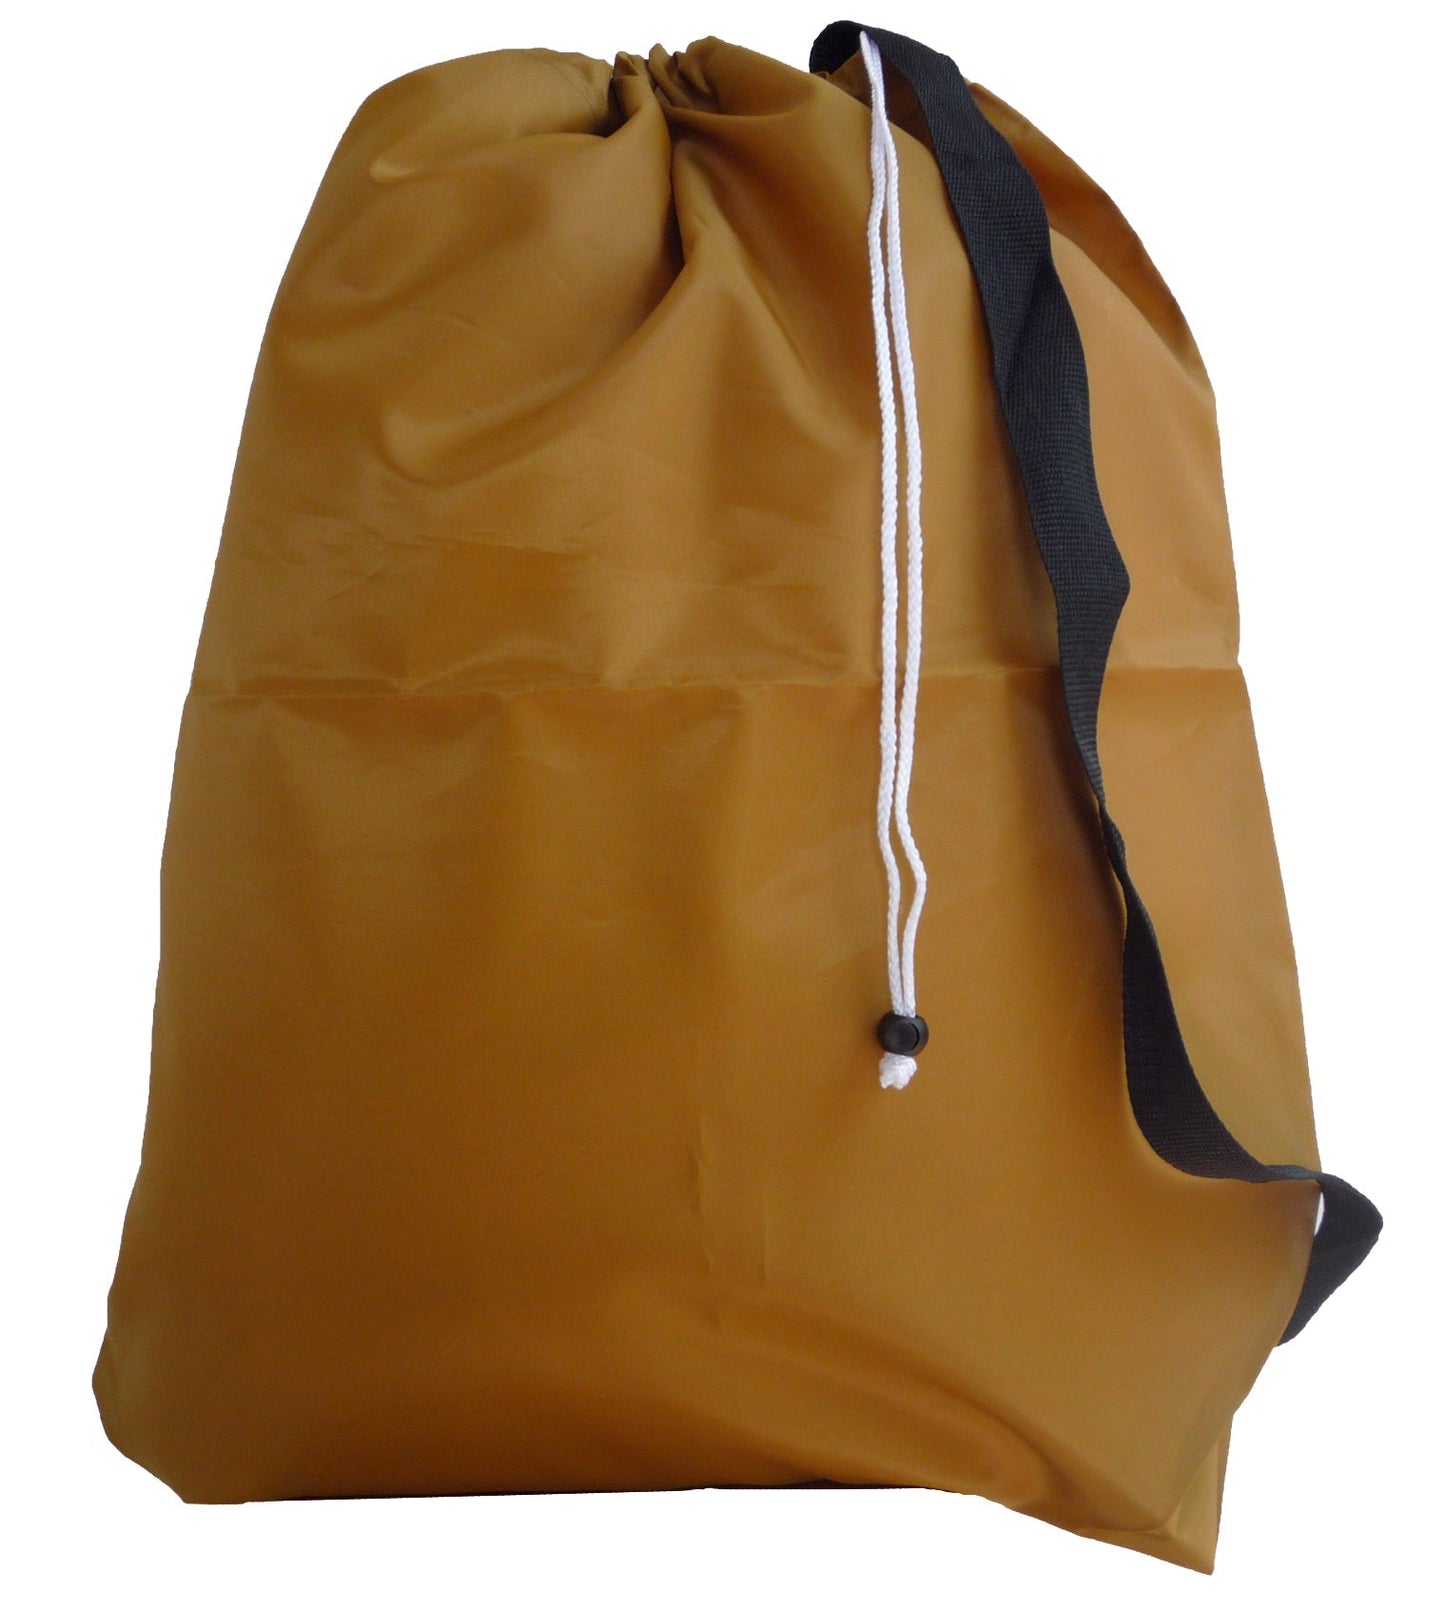  Nylon Laundry Bag - Locking Drawstring Closure and Machine  Washable. These Large Bags will Fit a Laundry Basket or Hamper and Strong  Enough to Carry up to Three Loads of Clothes. (